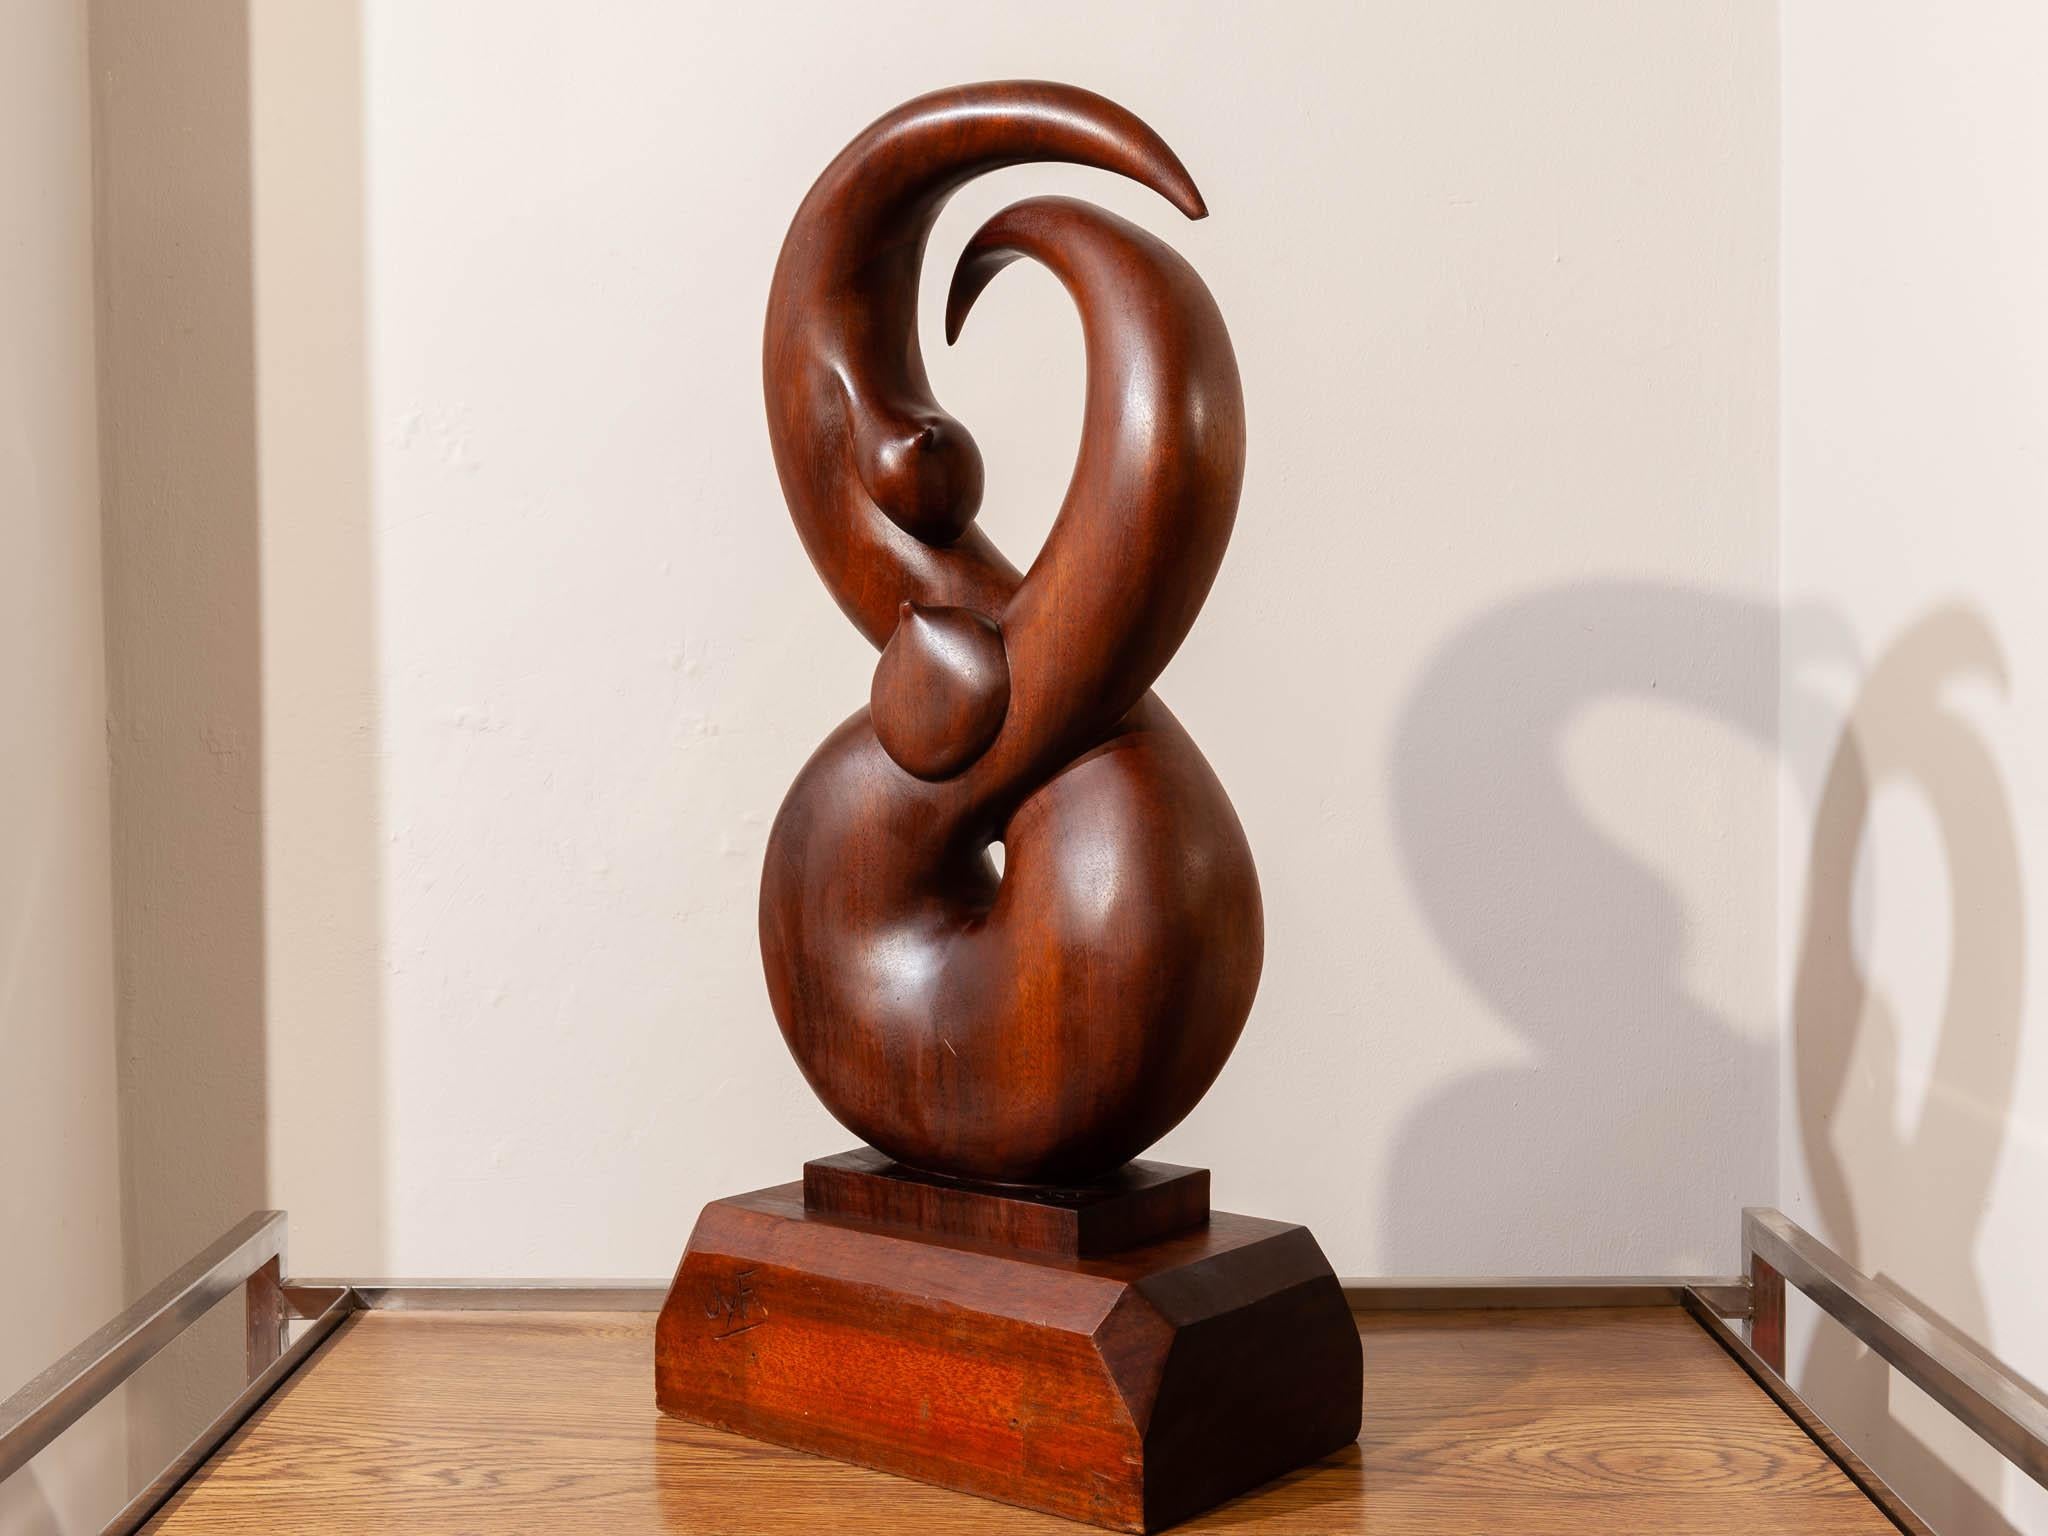 An unusual vintage wooden figure of eight sculpture. The artists initials, JyF, are engraved into the large wooden plinth base. Two unusual formed breasts are sculpted into the wood. One in the middle and another on the left hand side on the upper